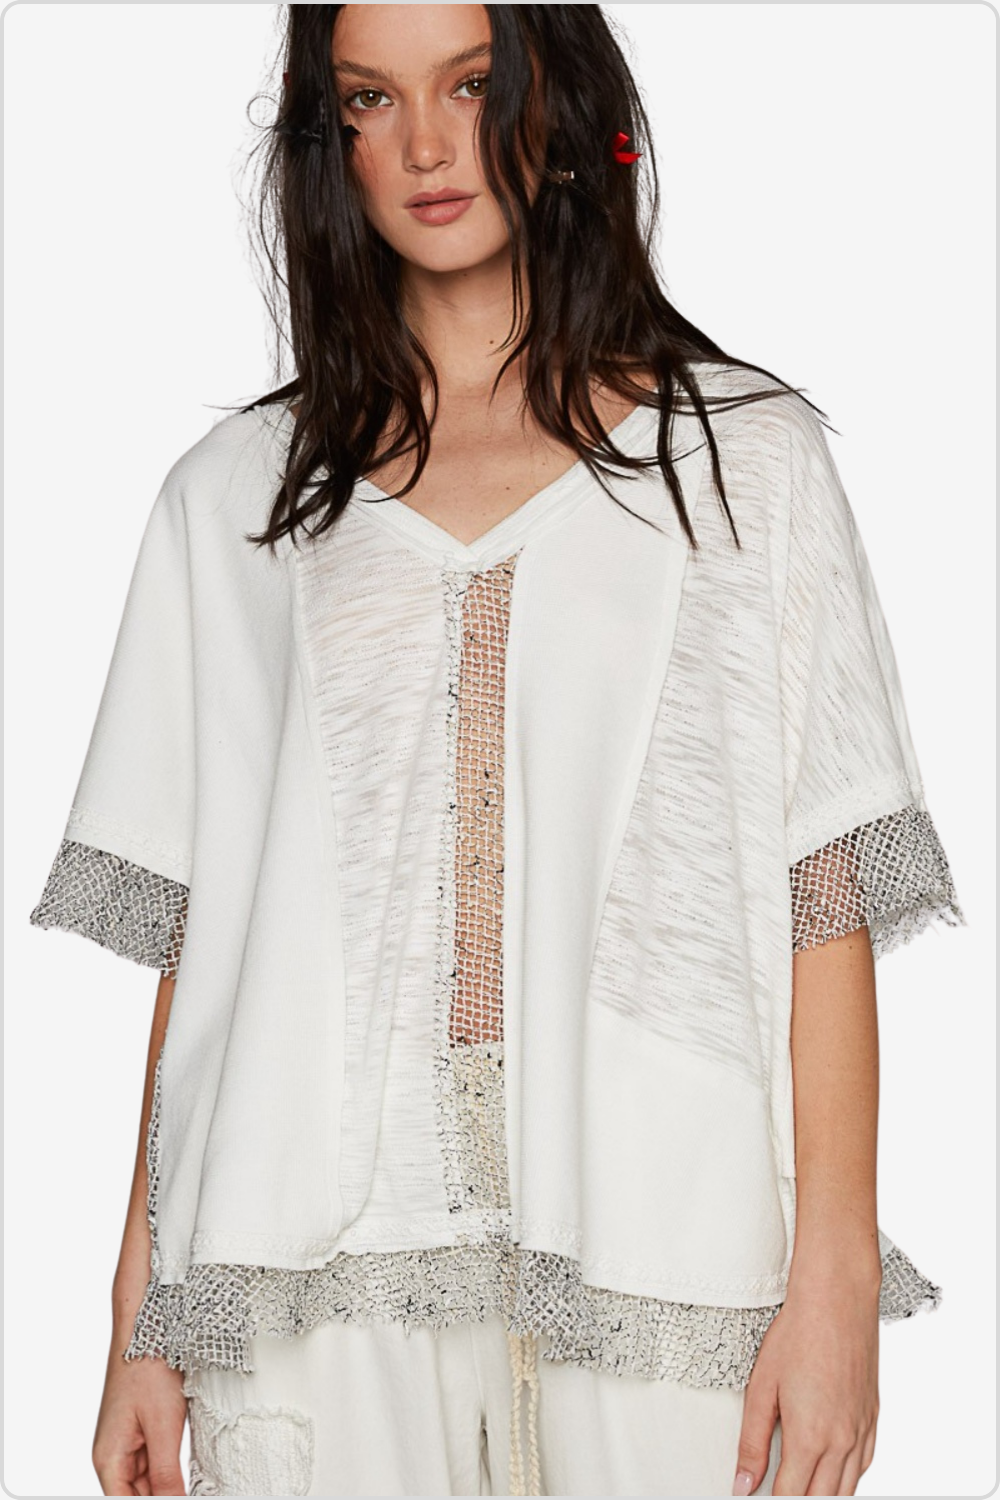 Chic Openwork V-Neck Half Sleeve Top with intricate sleeve detailing, front view